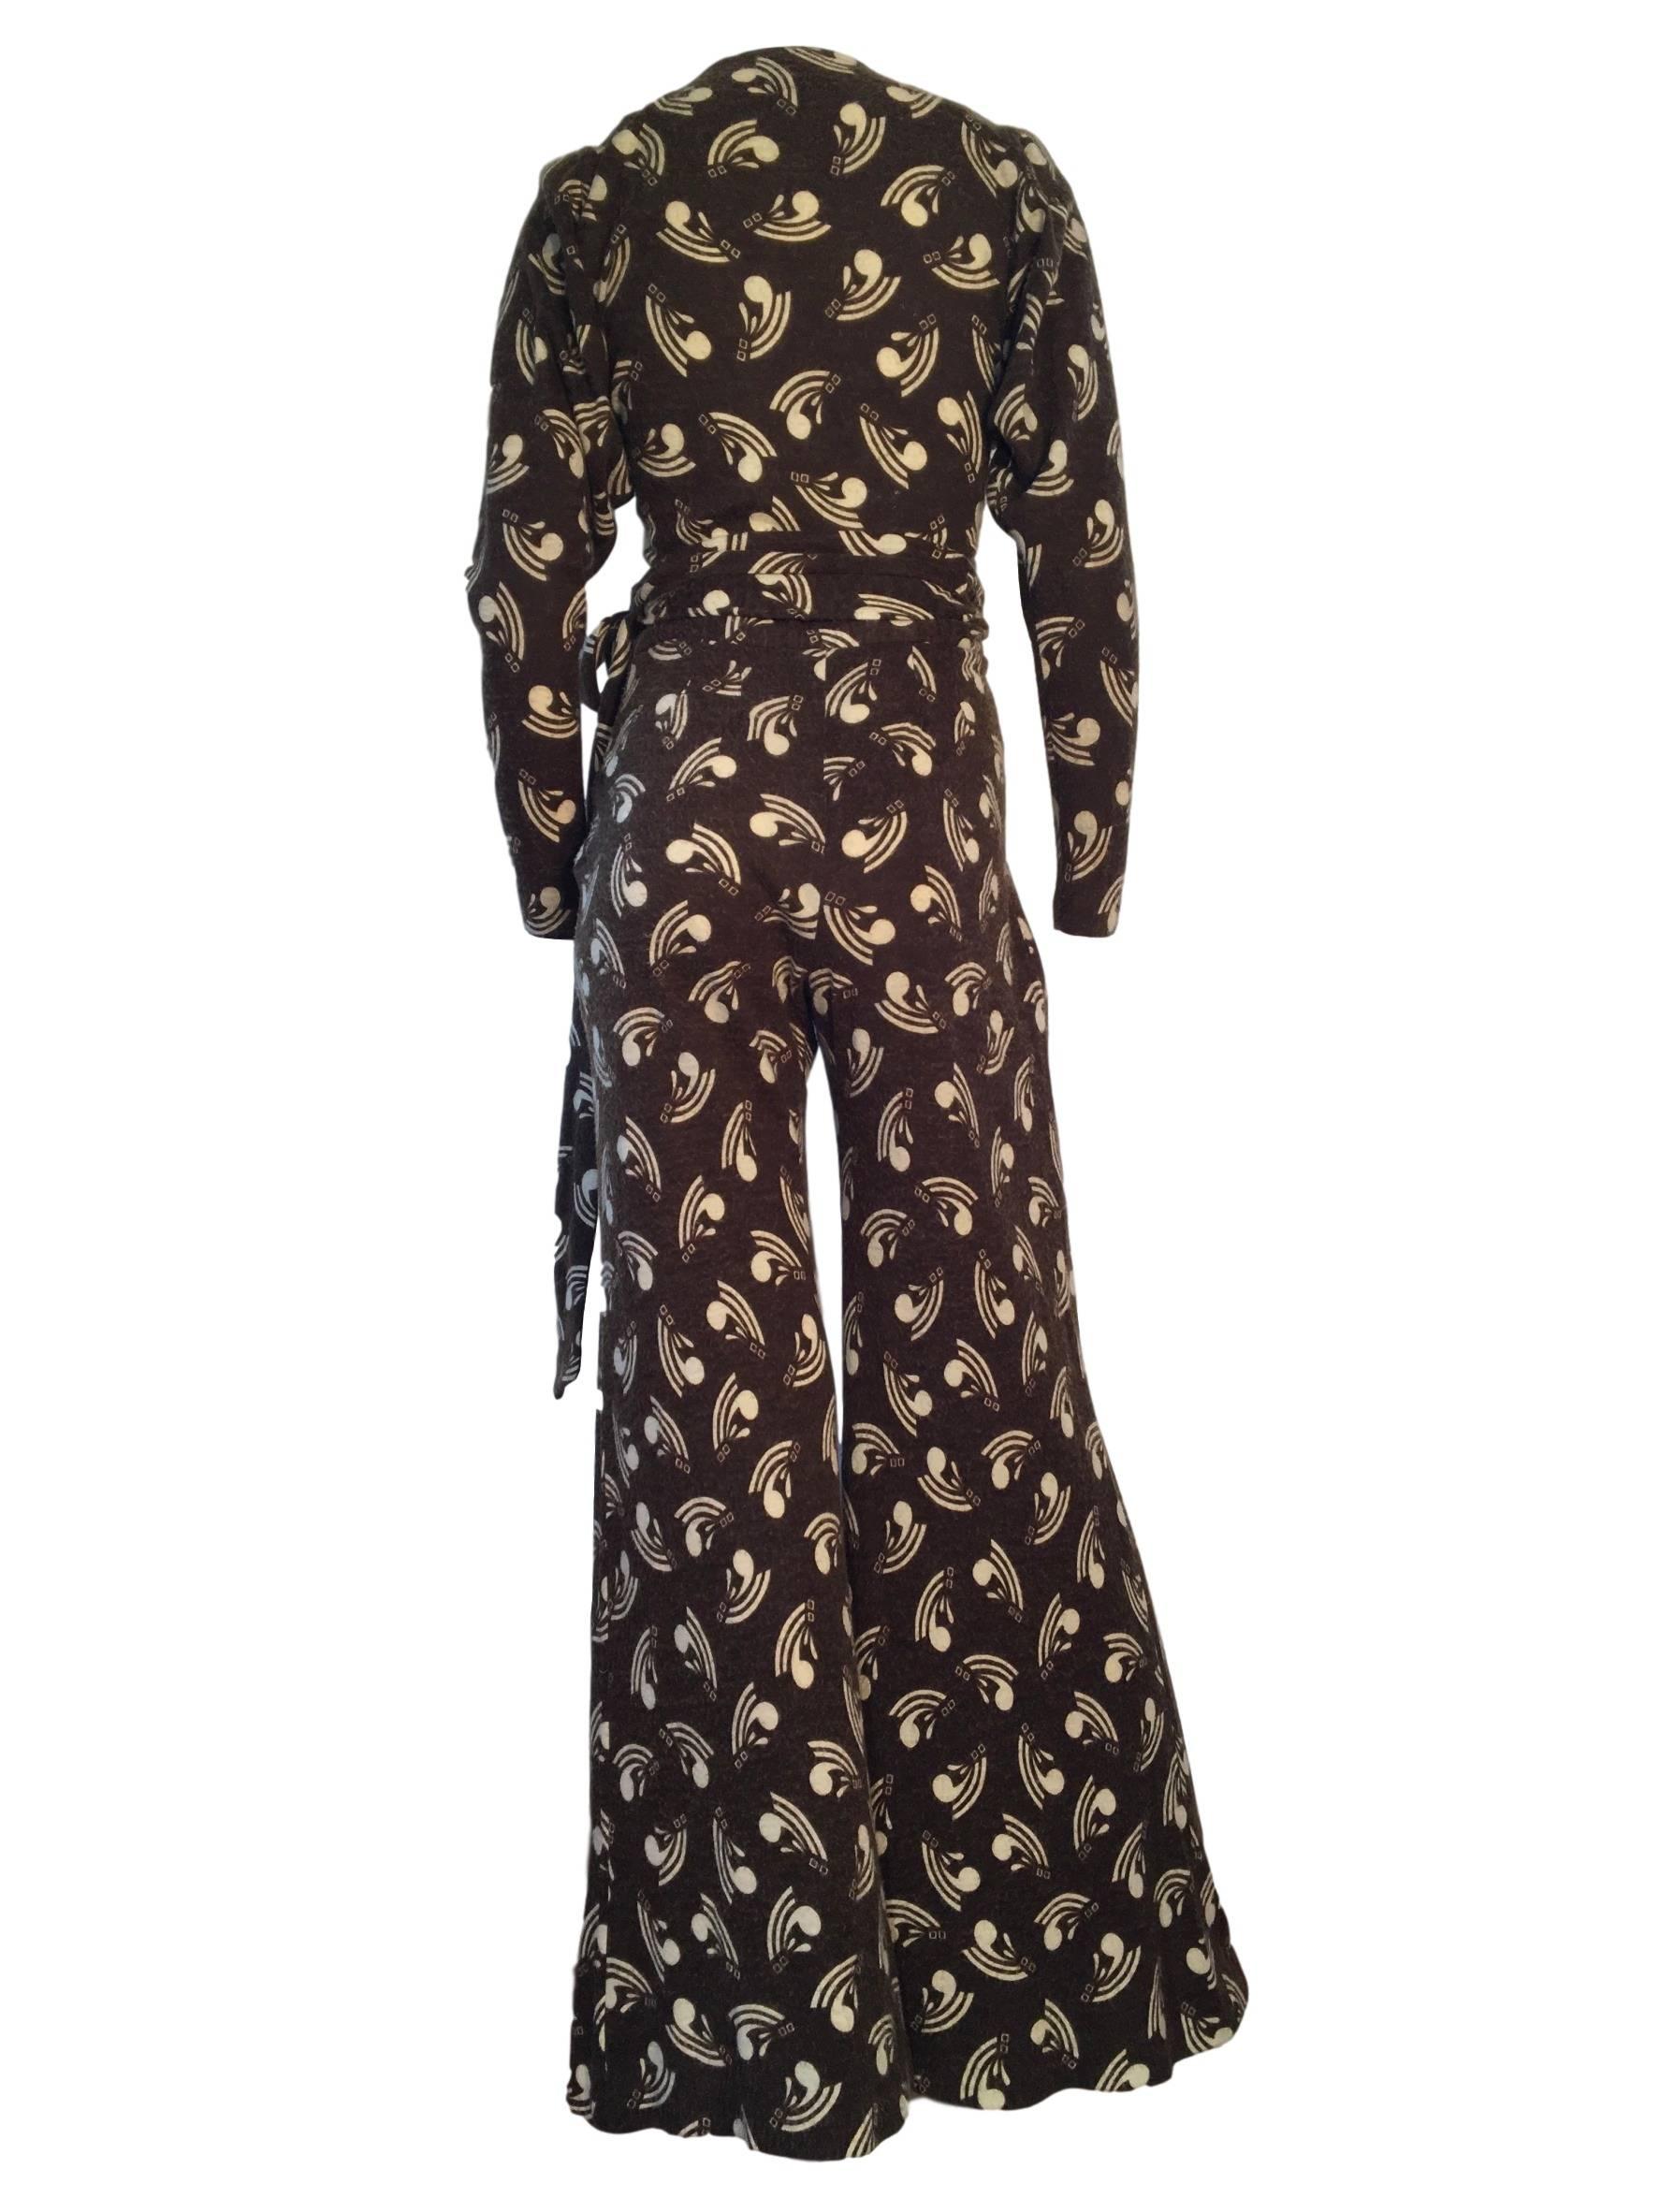 Vintage original Biba 2 piece, flares and wrap top made from a textured wooly like material. With deco style print, the top has wrap feature fastening, slight shoulder pads and fitted sleeves. Trousers have high waist and flared leg and fasten with